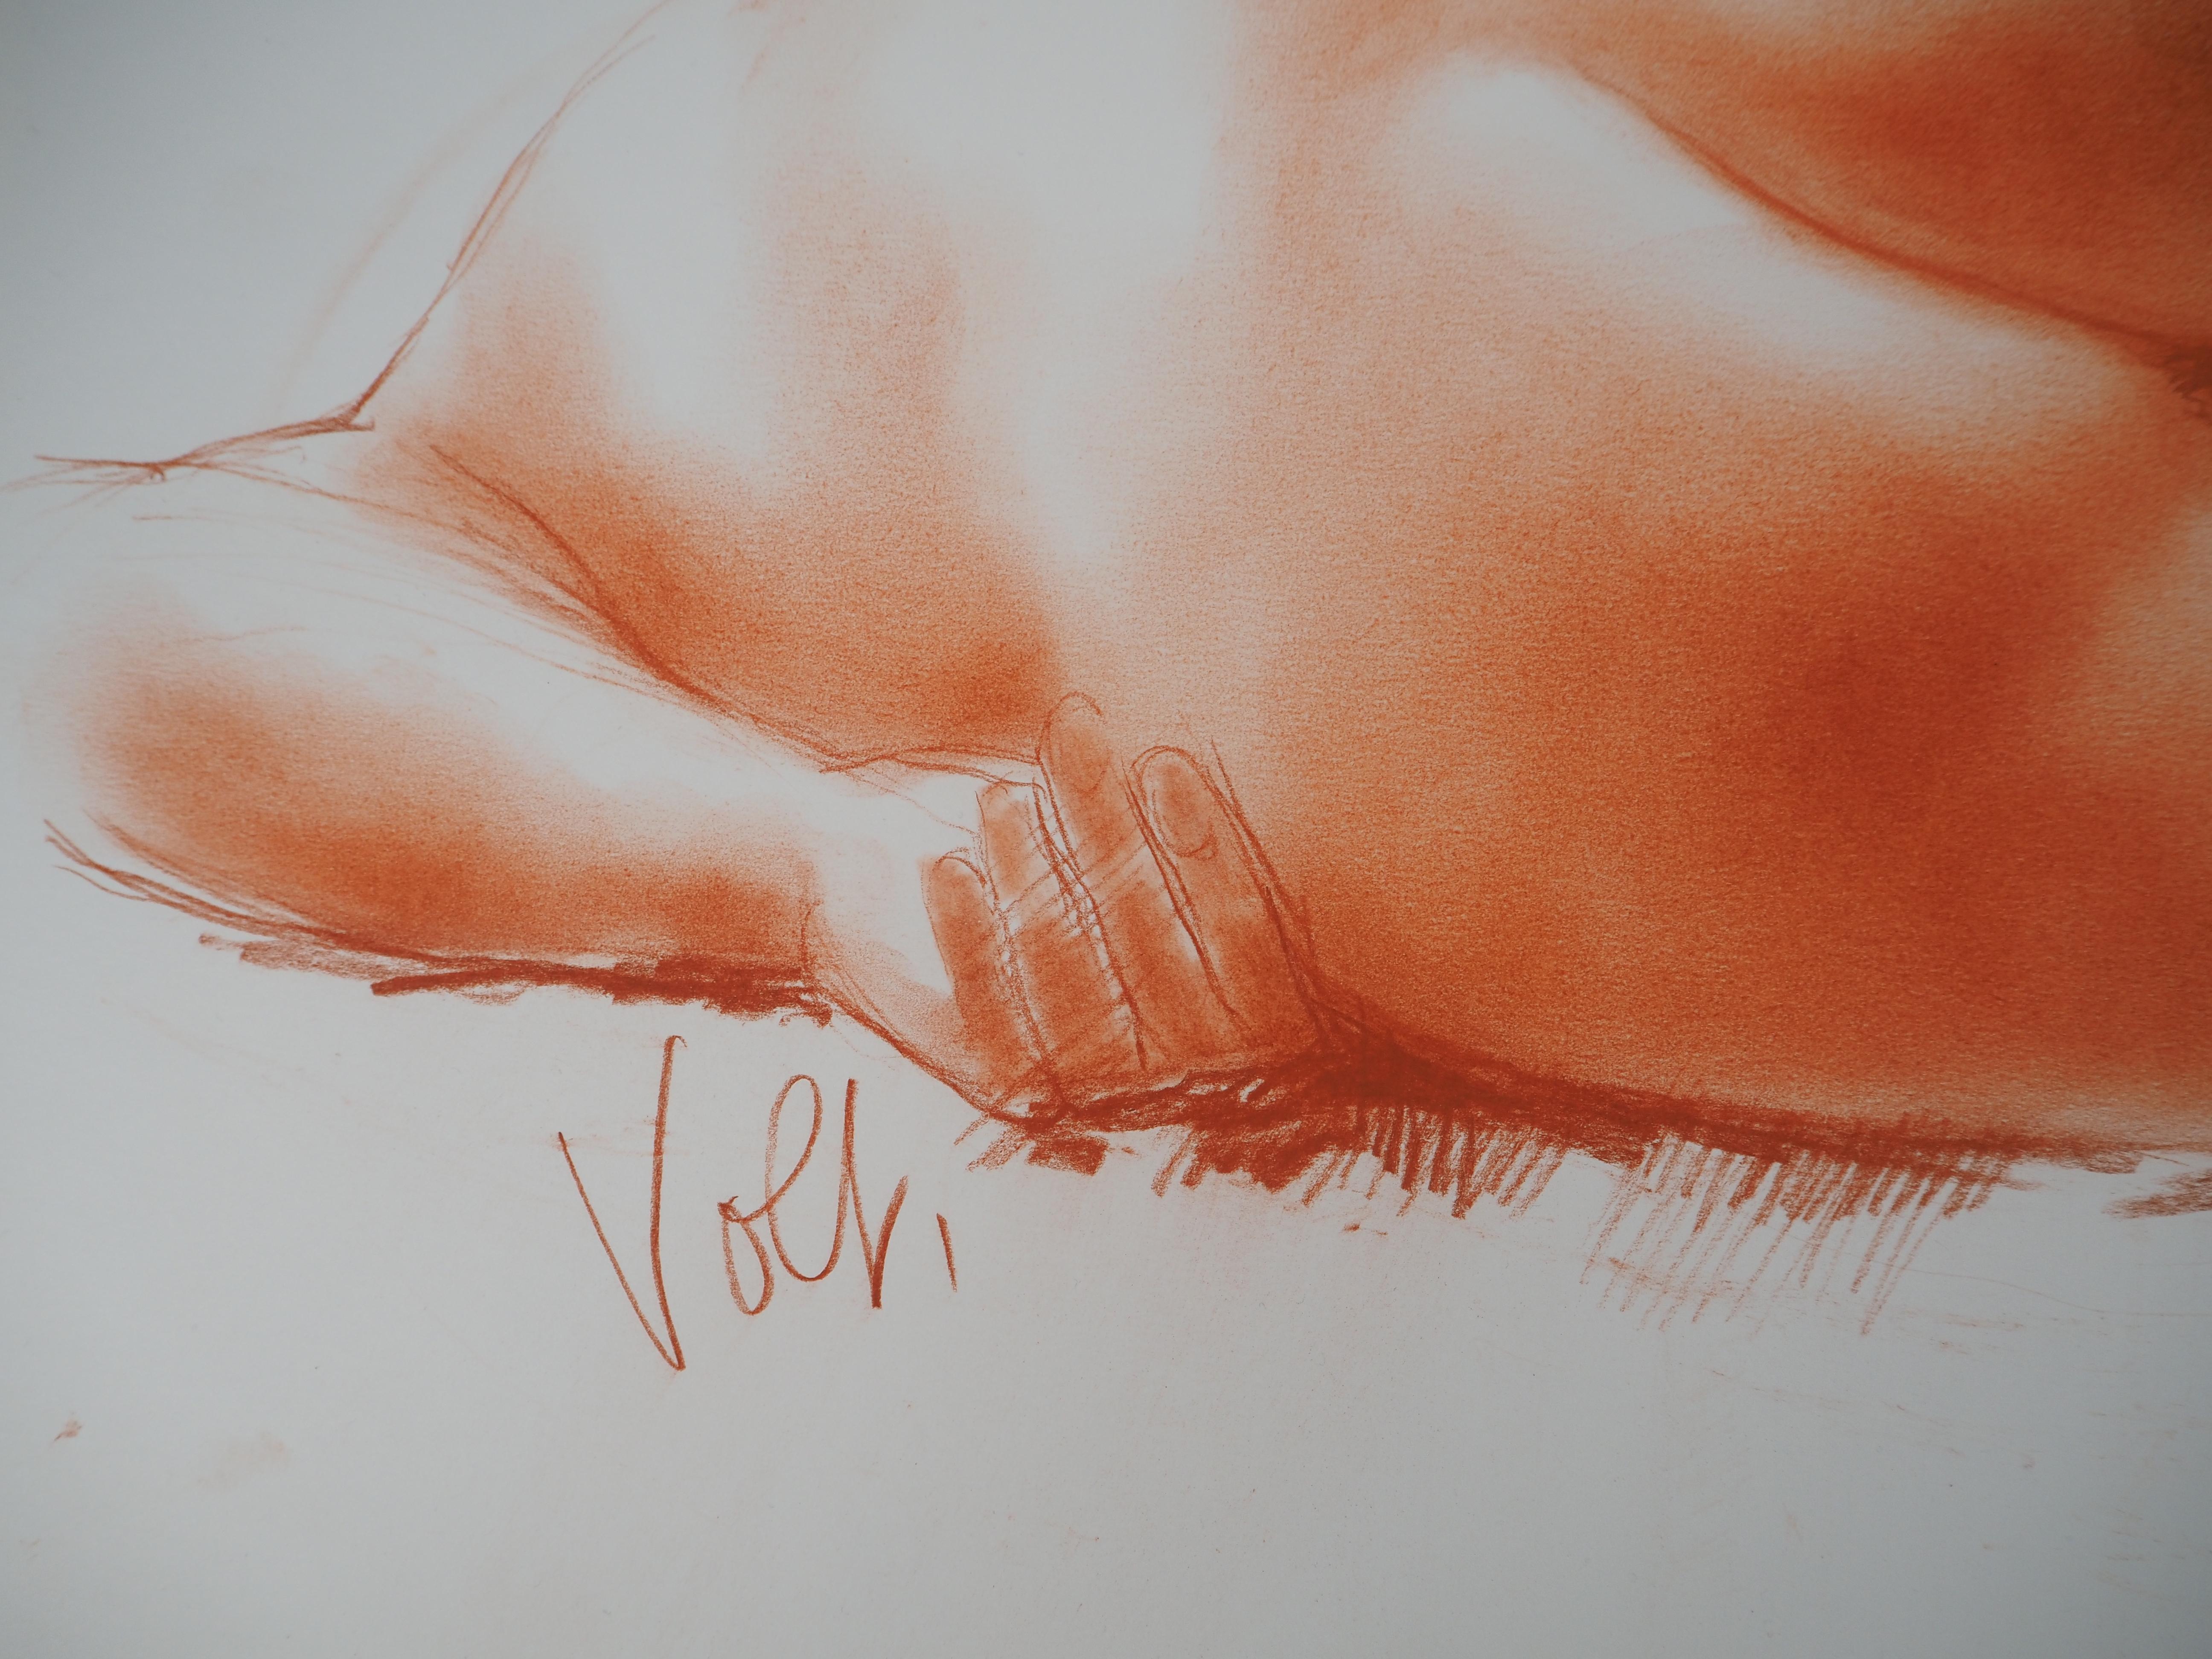 Reclining Nude - Original handsigned drawing in sanguine - Modern Art by Antoniucci Volti